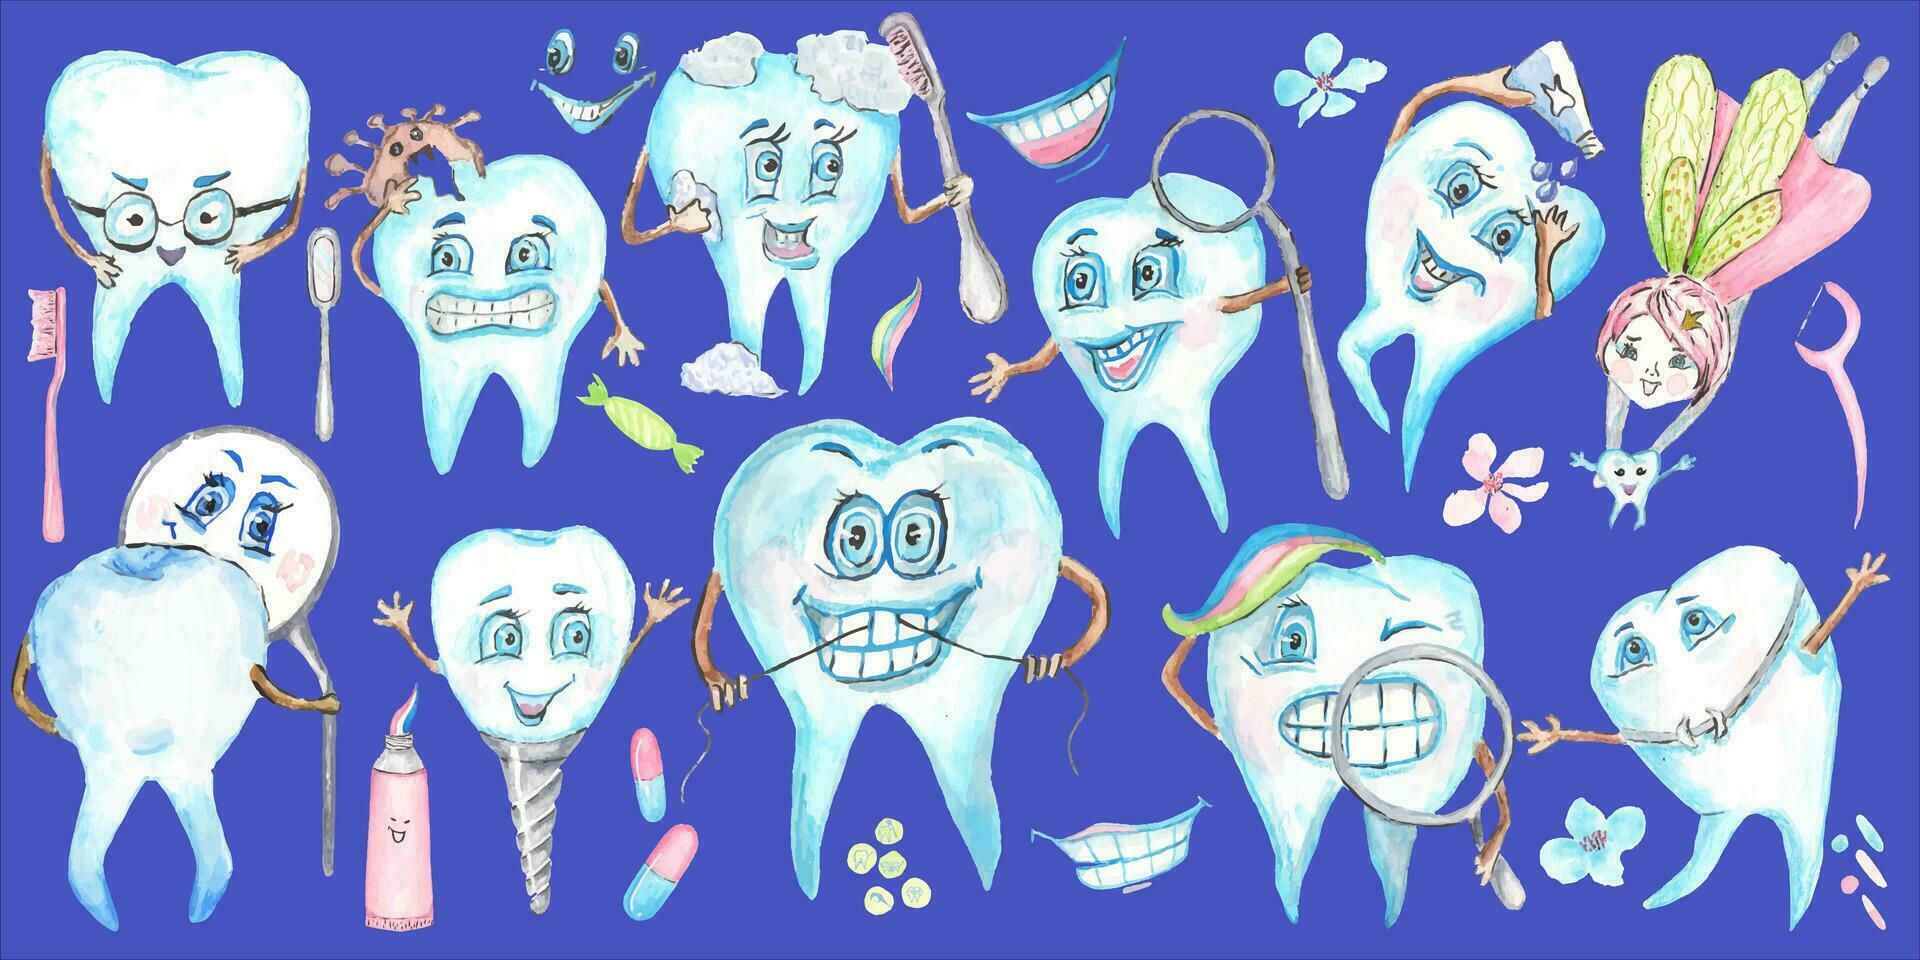 Collection of 26 funny teeth elements. The tooth fairy, teeth and dental care elements are painted with watercolors. You can make postcards, patterns, cards and add to other illustrations on your own vector